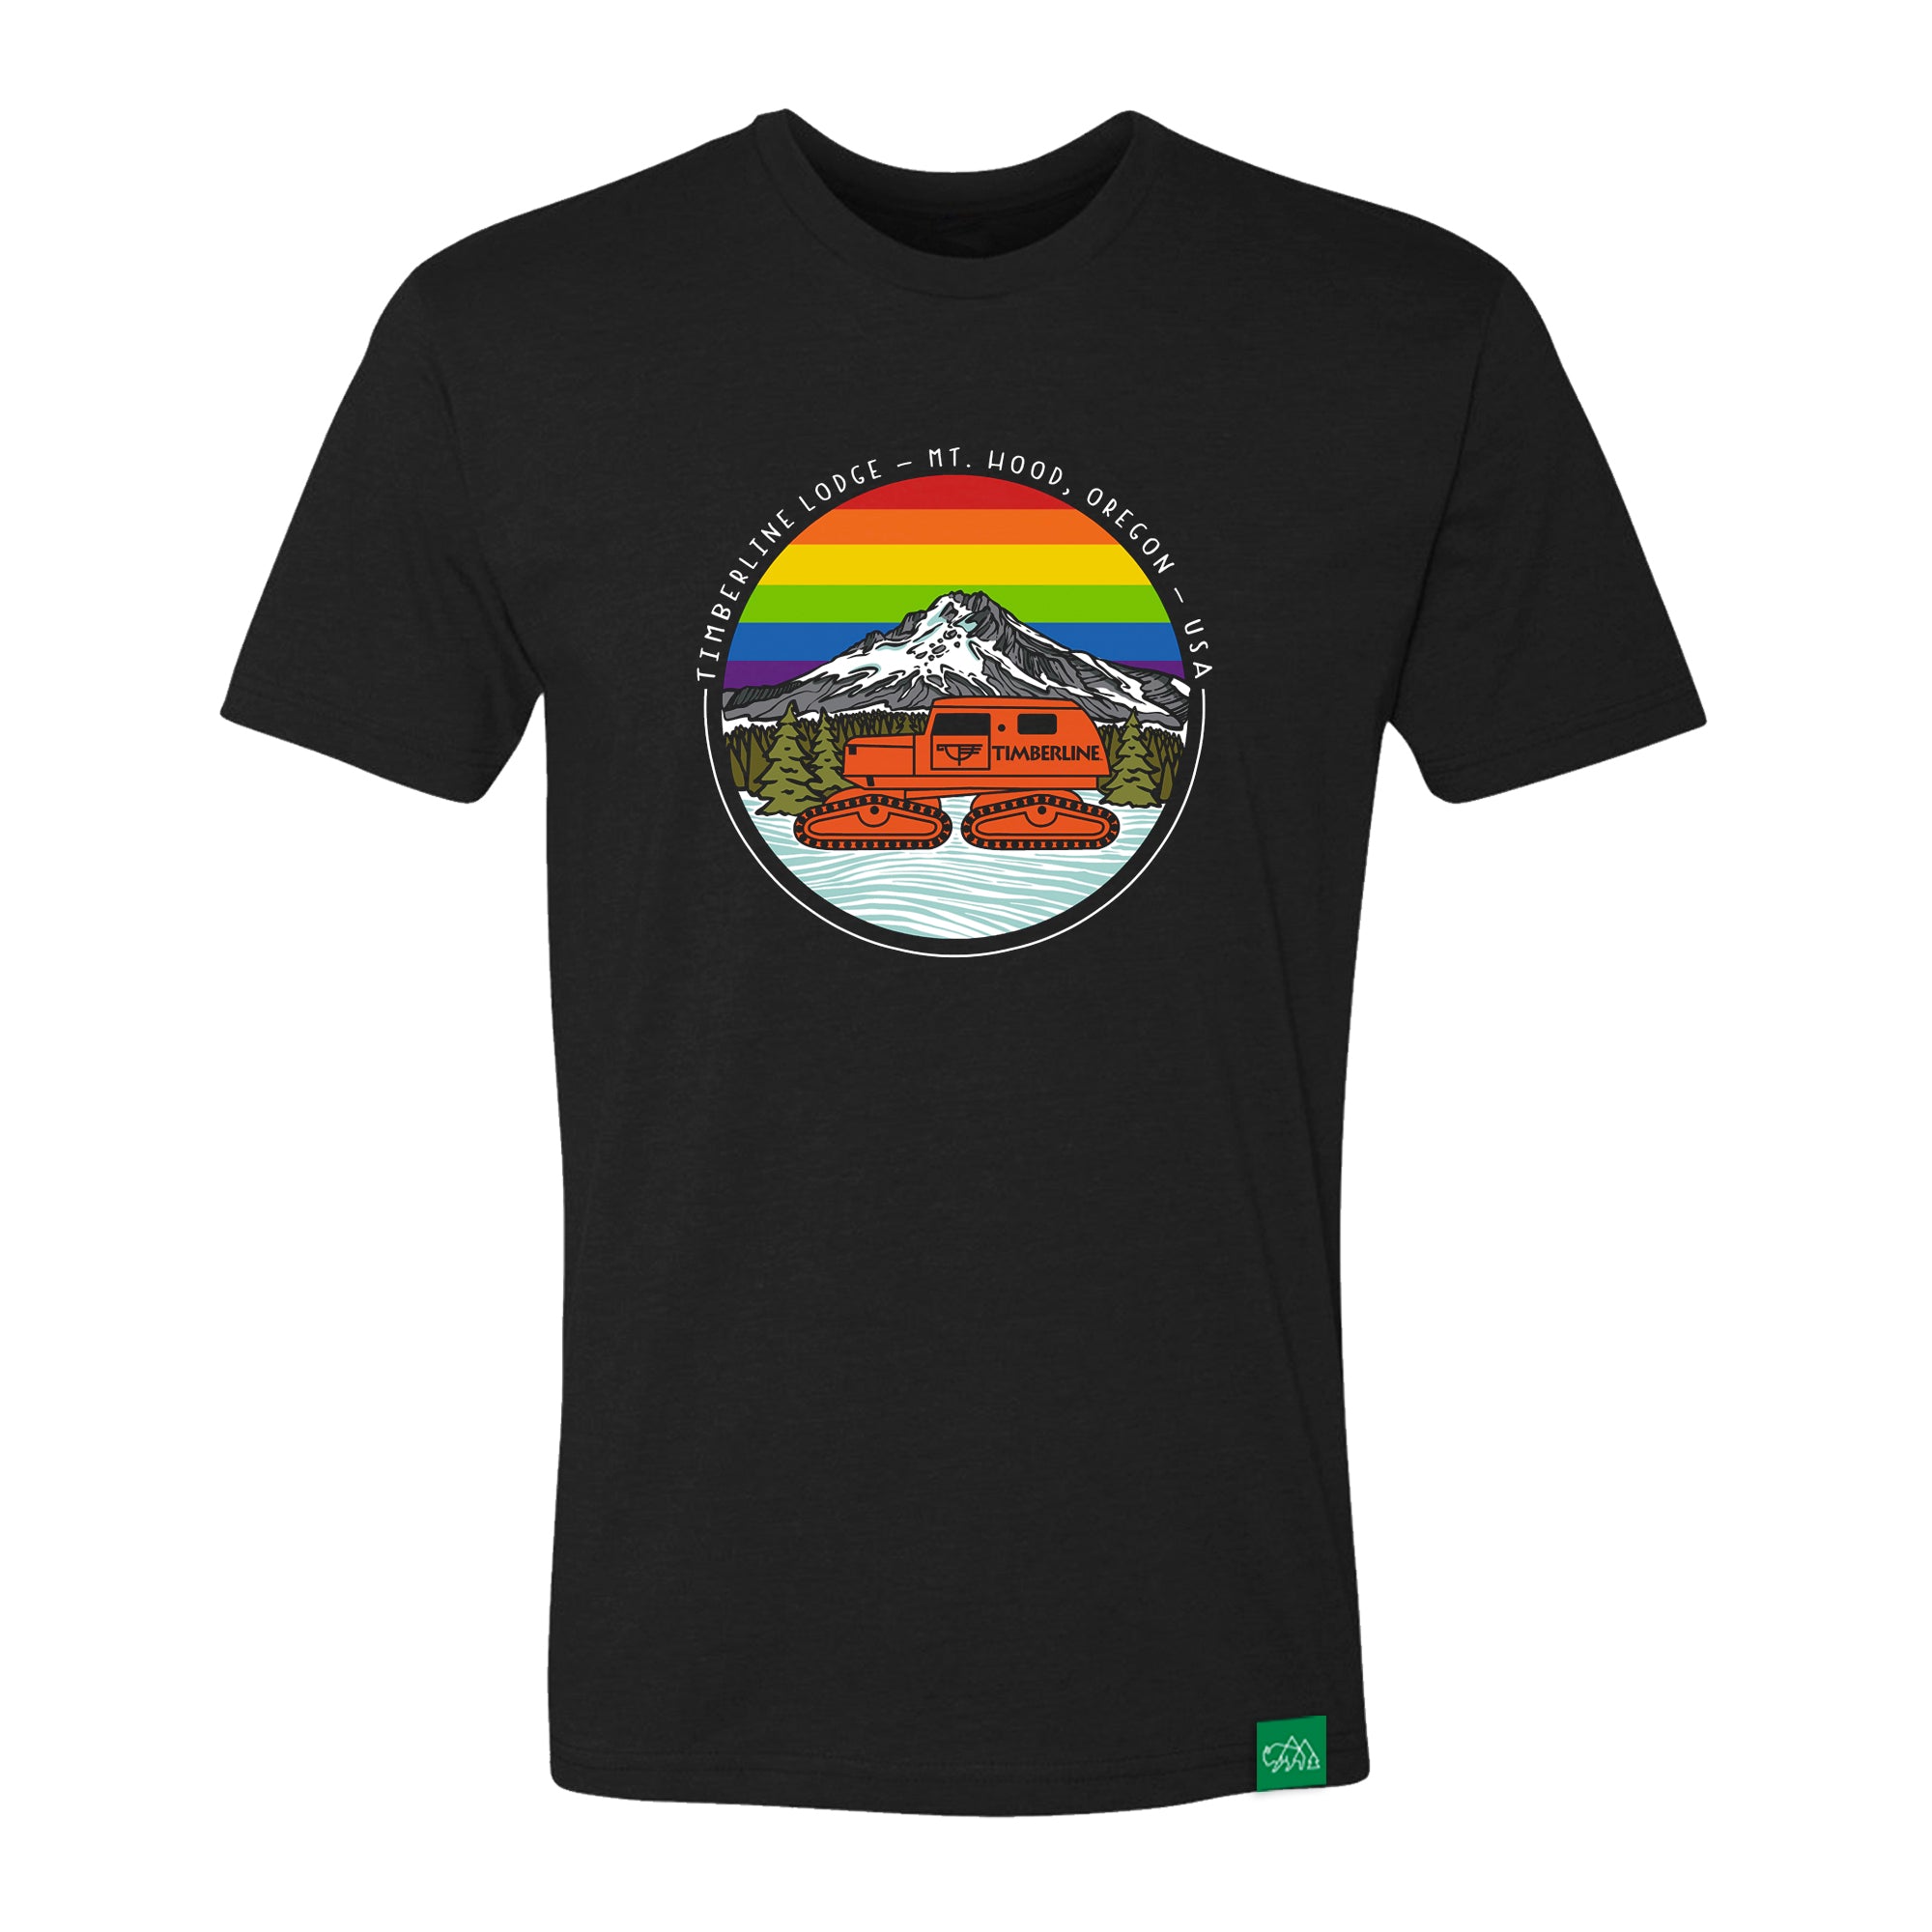 Tucker Pride tee with a rainbow mountain graphic design on the chest featuring Mount Hood and a nature-inspired badge by Timberline Lodge.